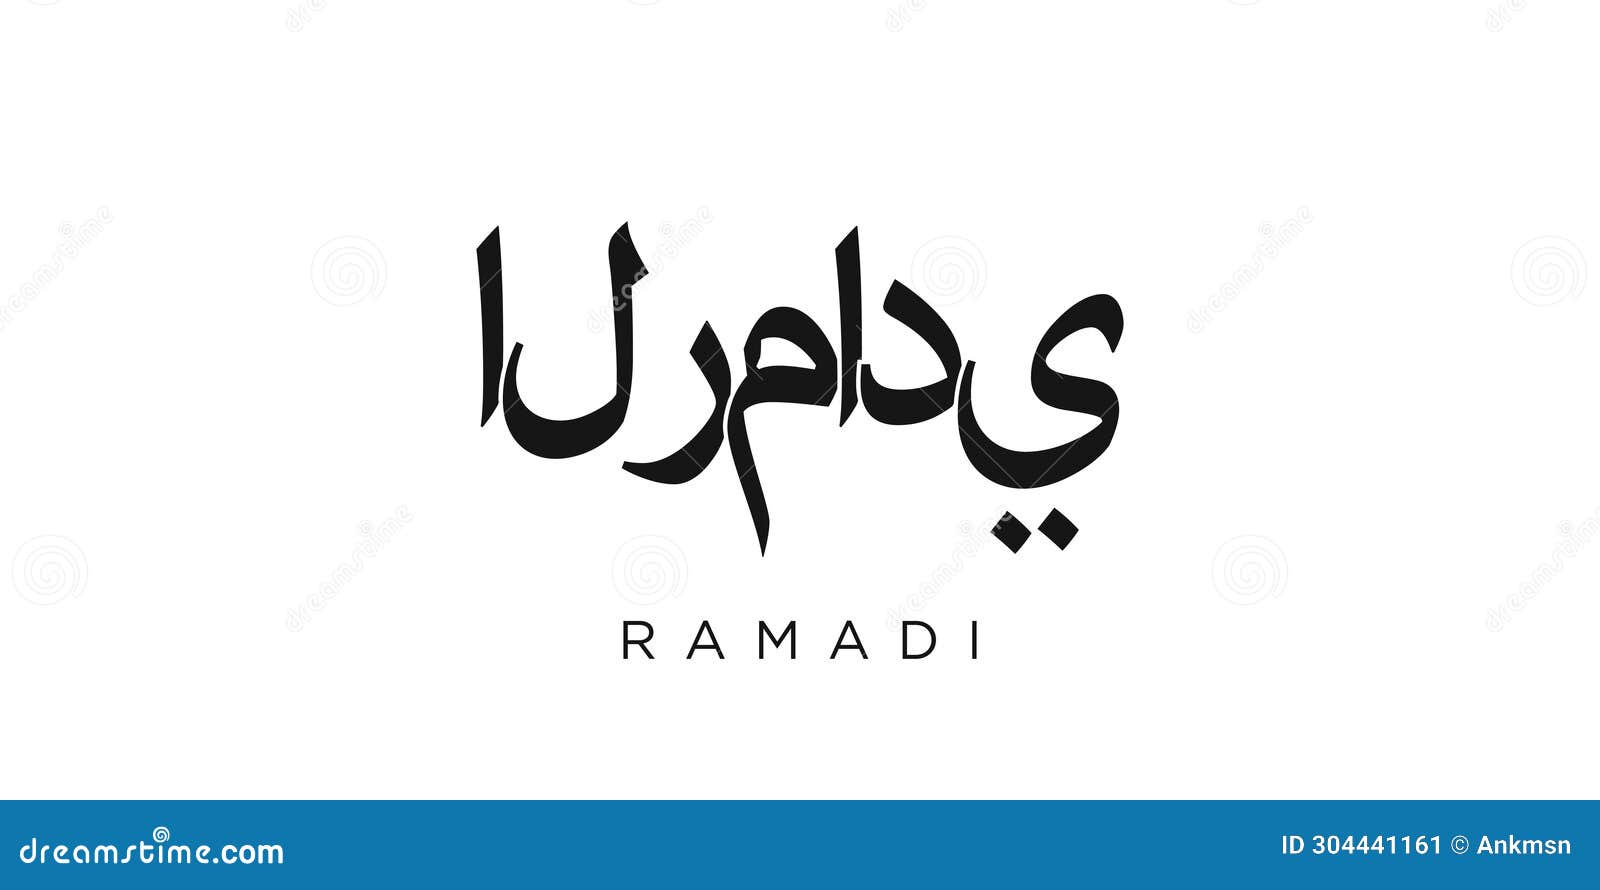 ramadi in the iraq emblem. the  features a geometric style,   with bold typography in a modern font. the